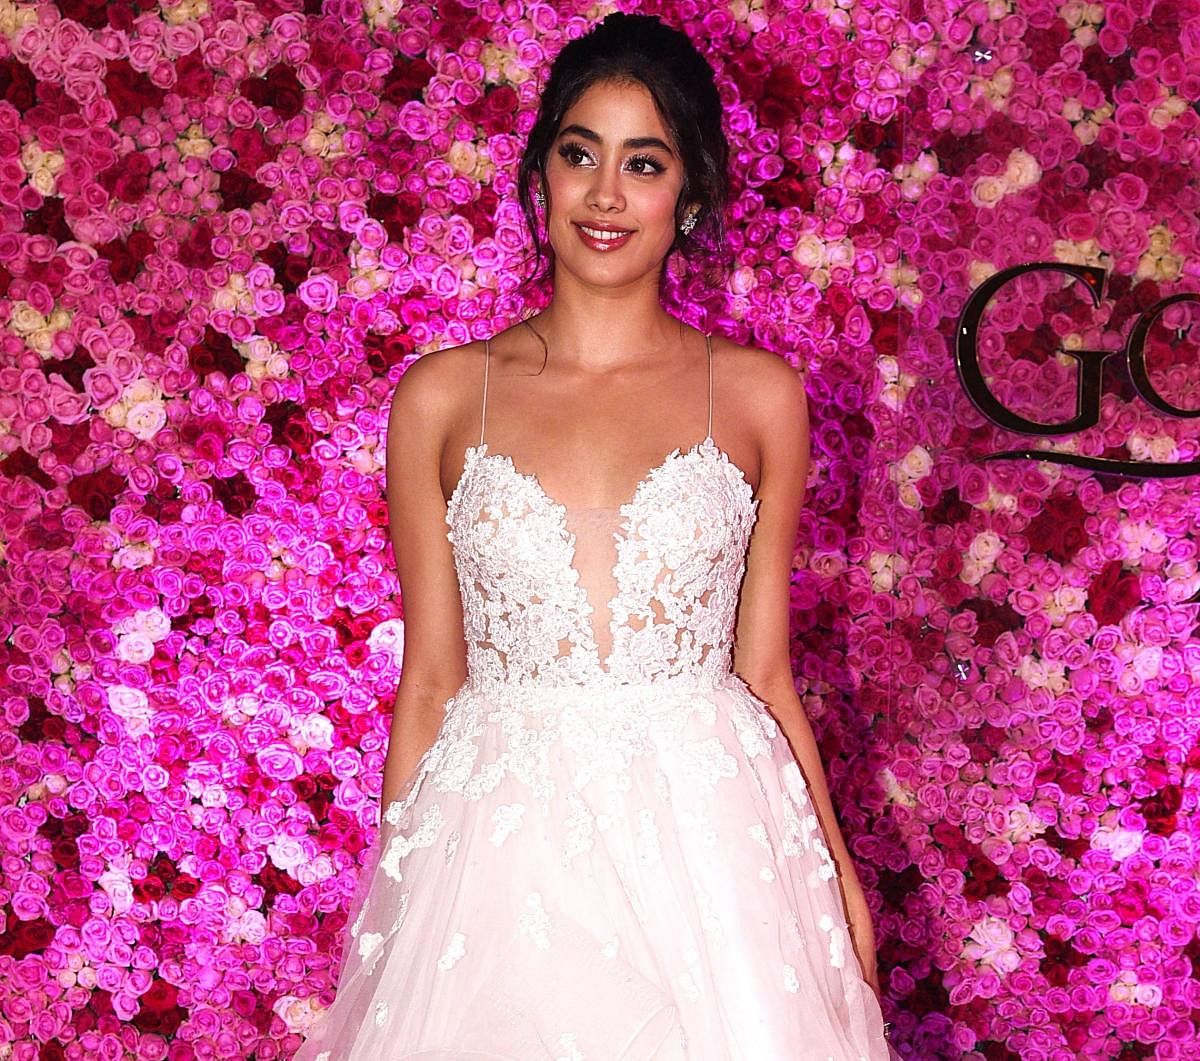 It is for the first time that Jahnvi, who made her Bollywood debut with 2018's "Dhadak", will be working with Zoya. (File photo)